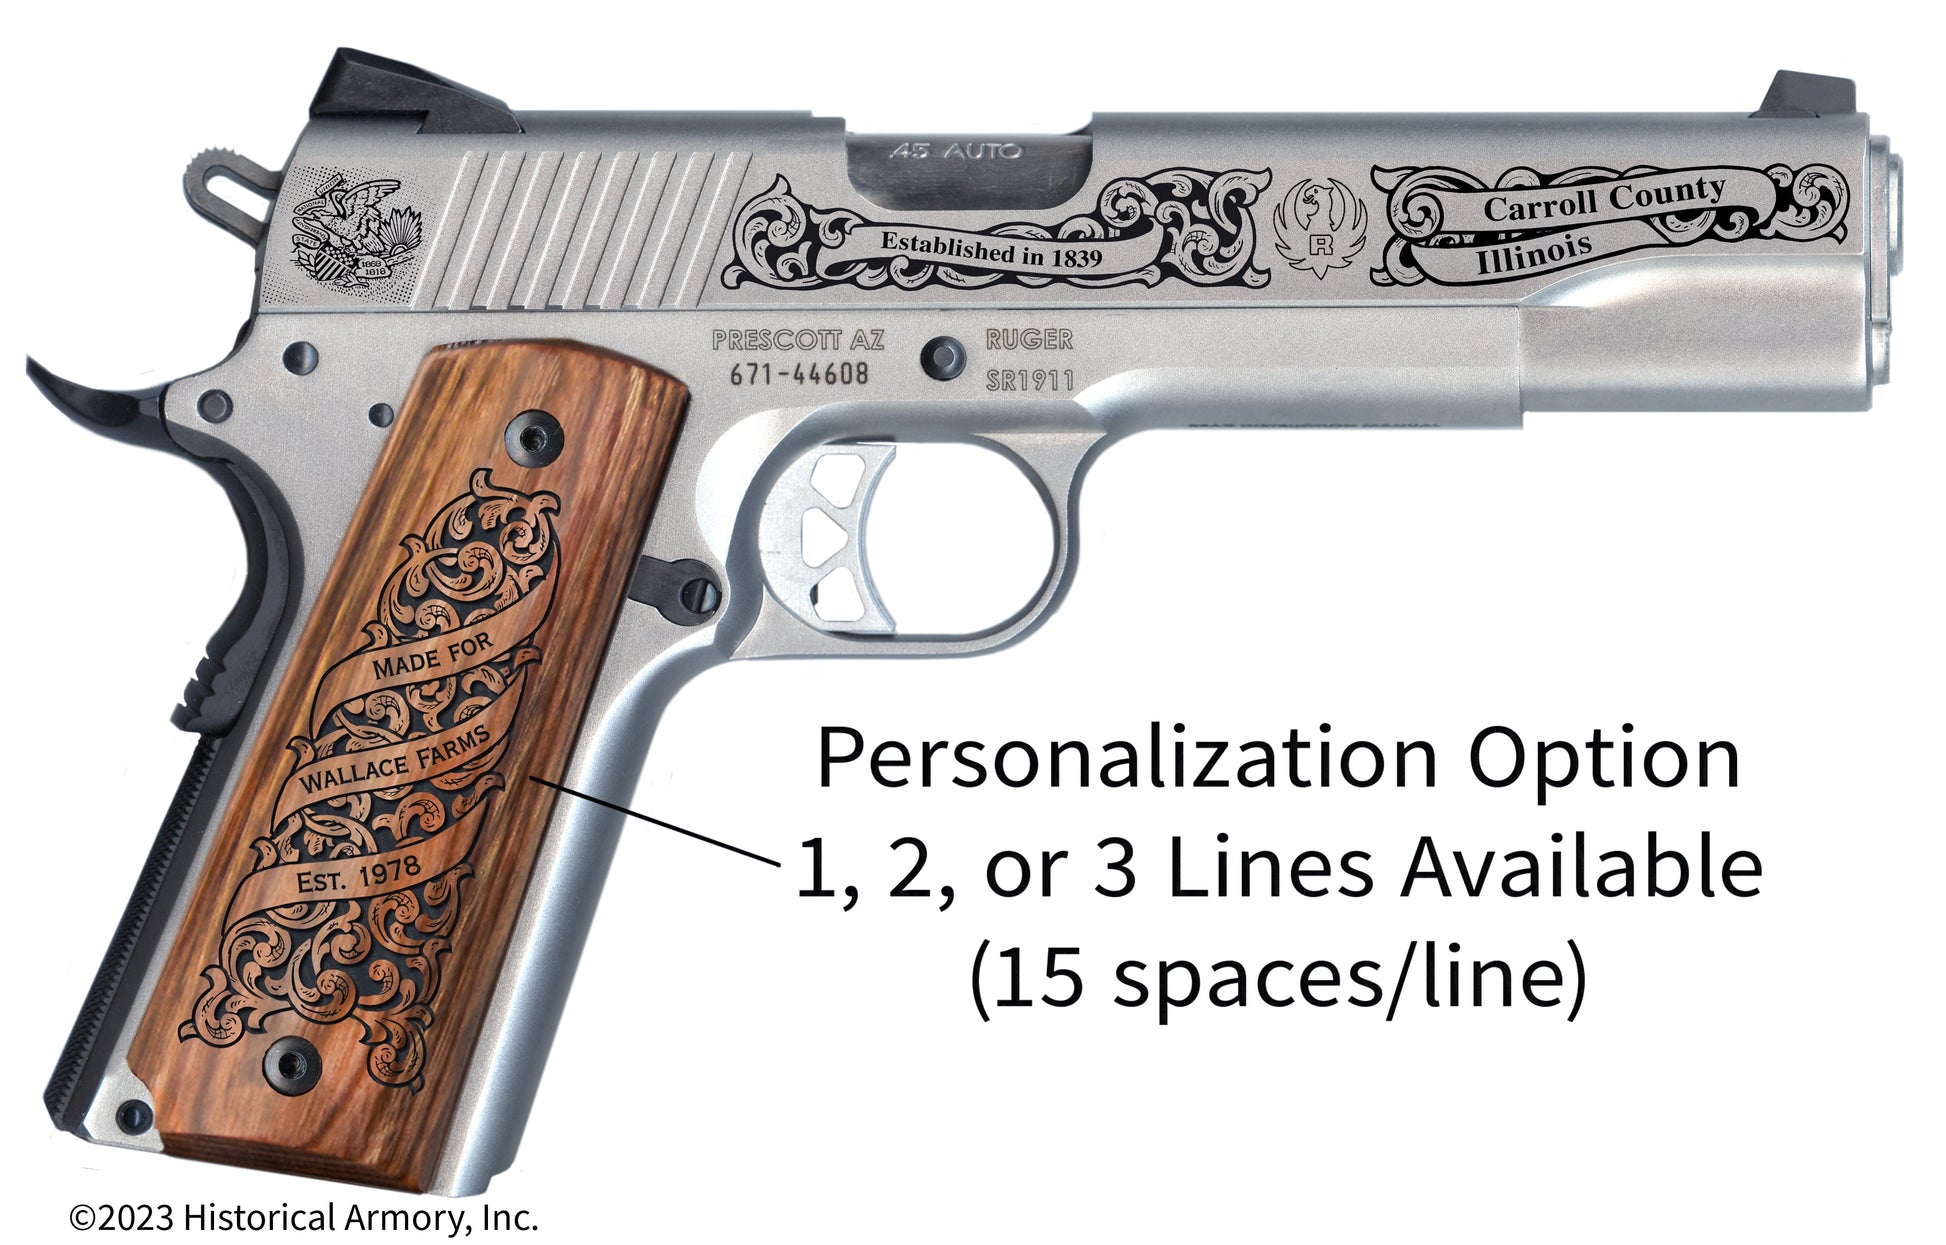 Carroll County Illinois Personalized Engraved .45 Auto Ruger 1911